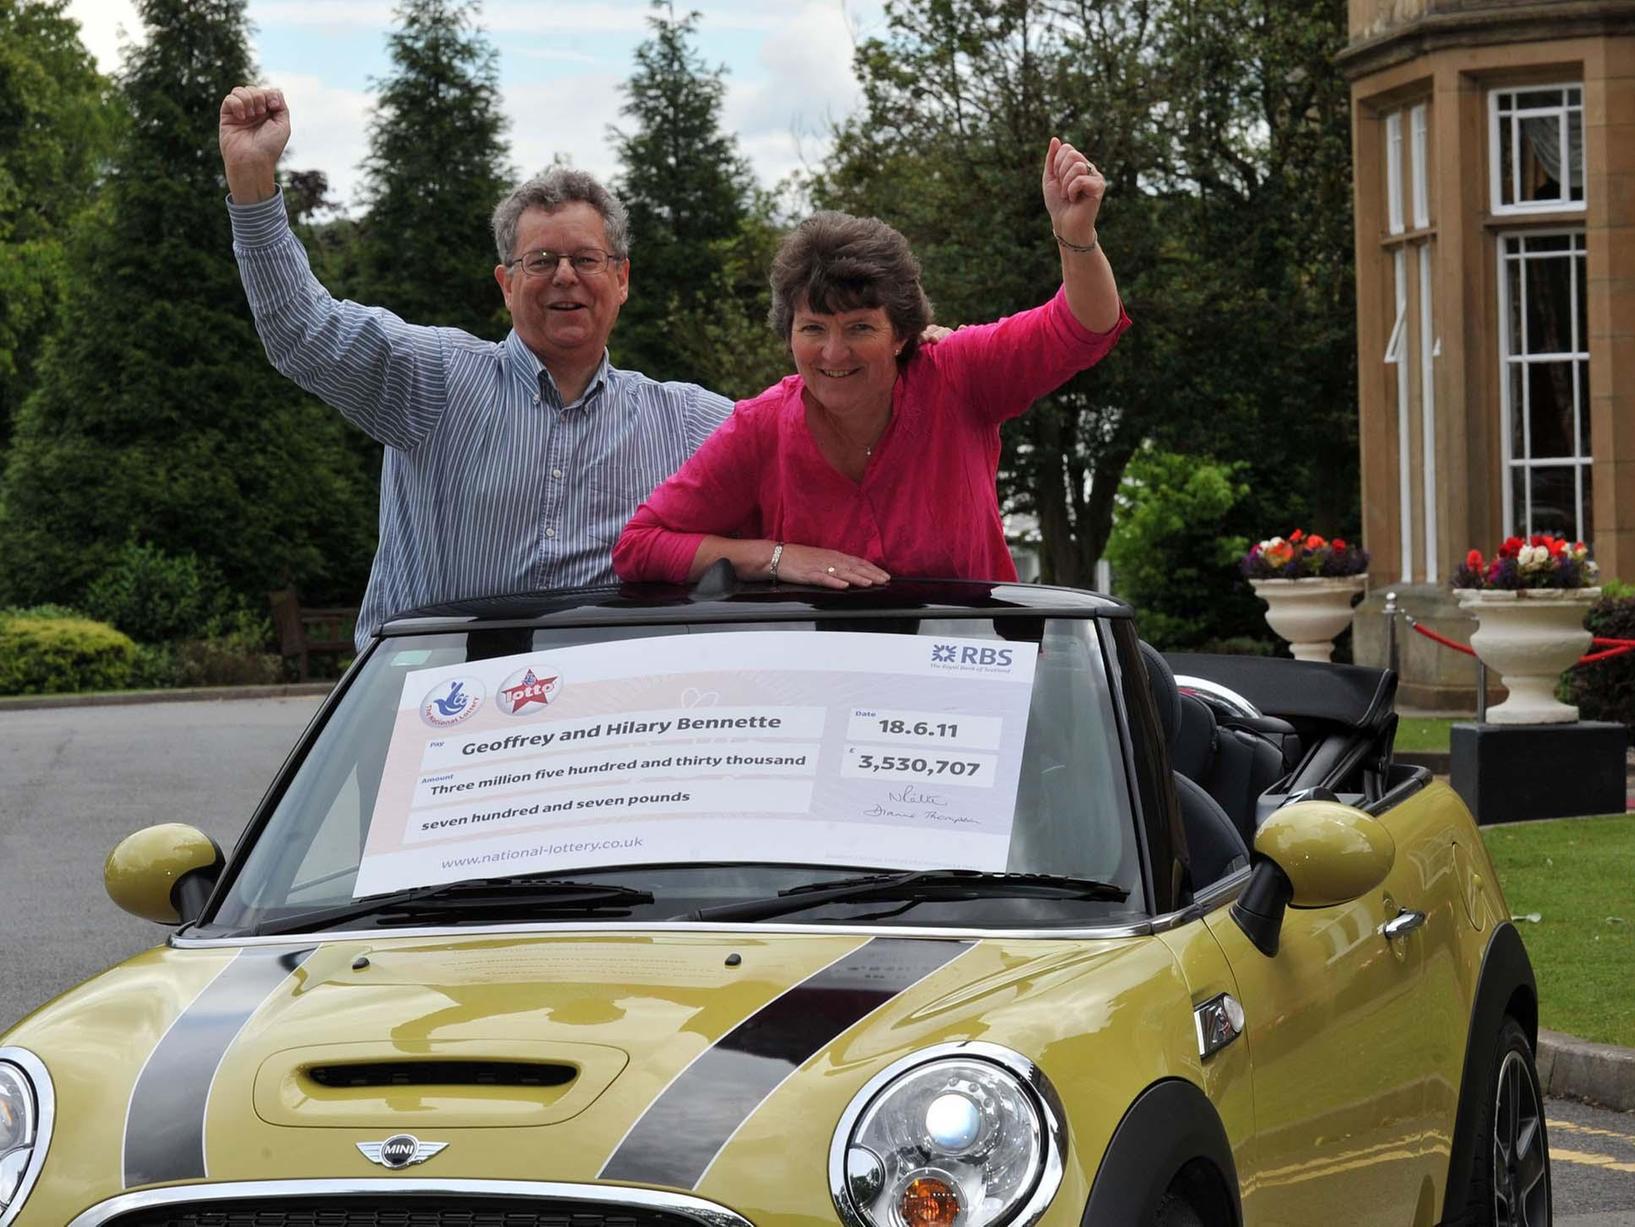 Geoffrey and Hilary Bennette, from Blackburn, celebrate after winning a 3.5m share in June 2011